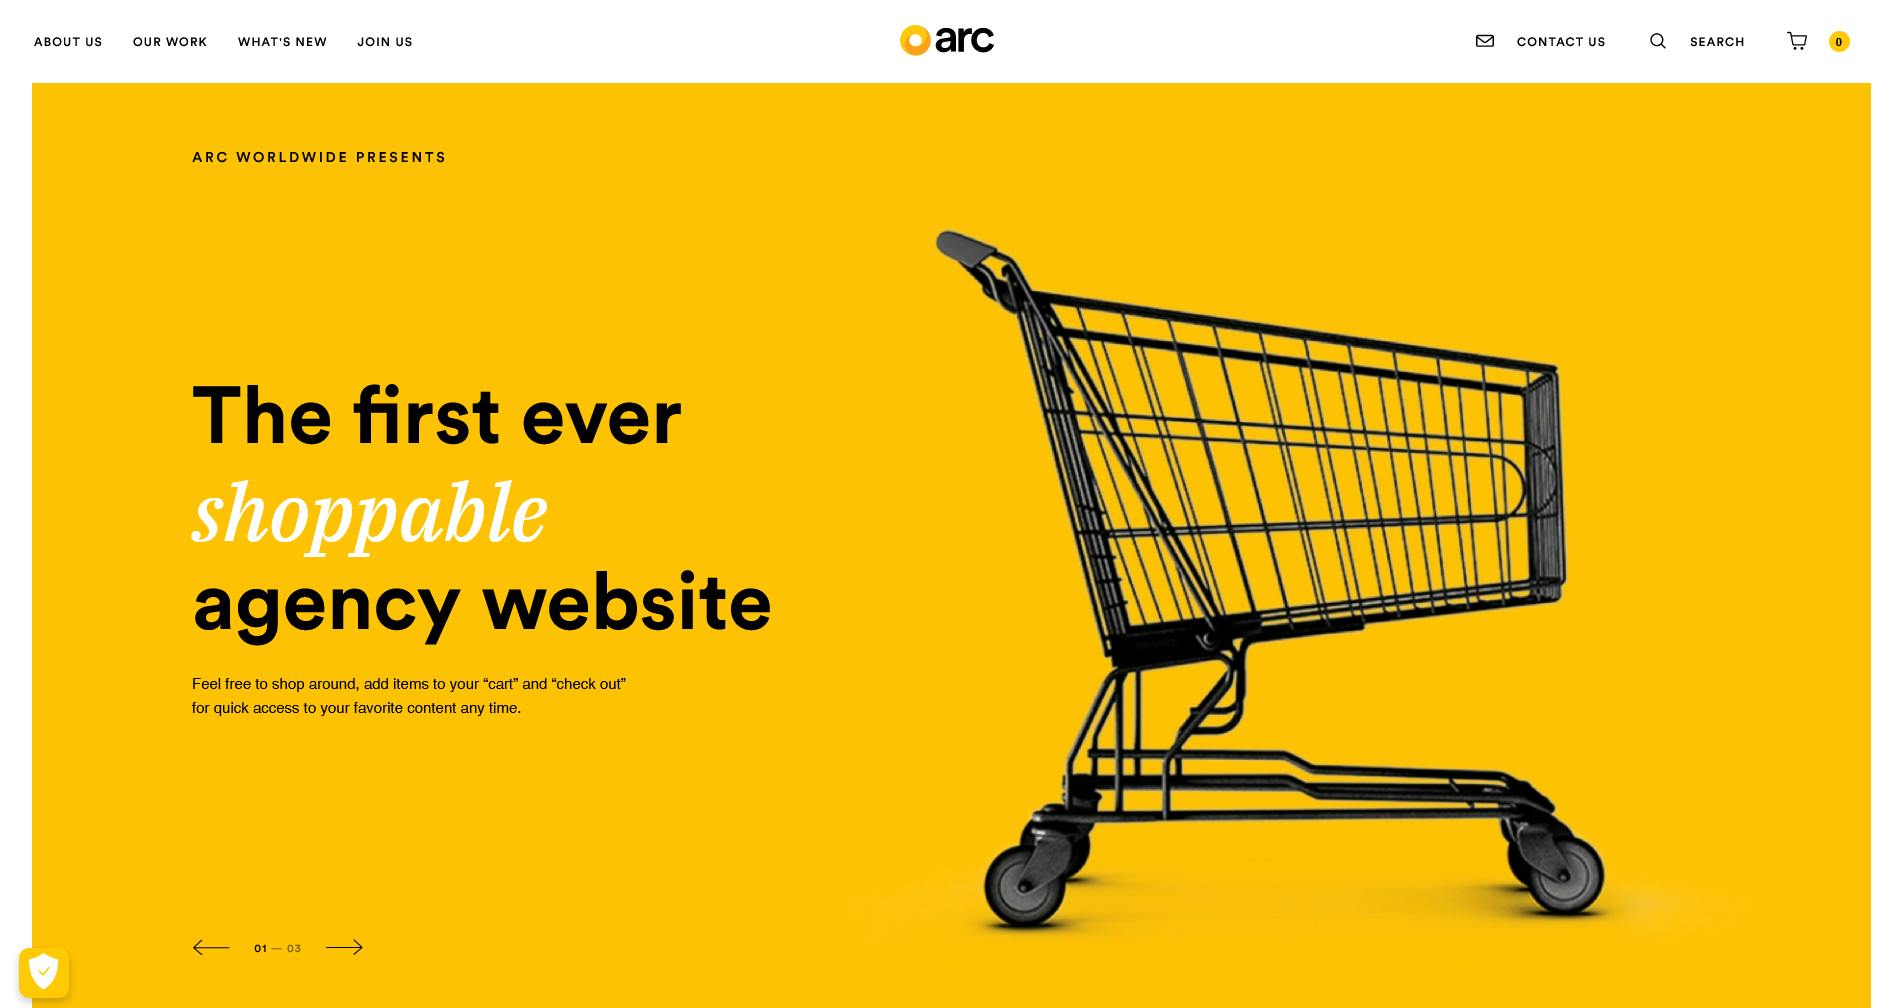 A screenshot of Arc WorldWide's homepage, which is yellow with black text and a black shopping cart image. The headline reads, "The first ever shoppable agency website."